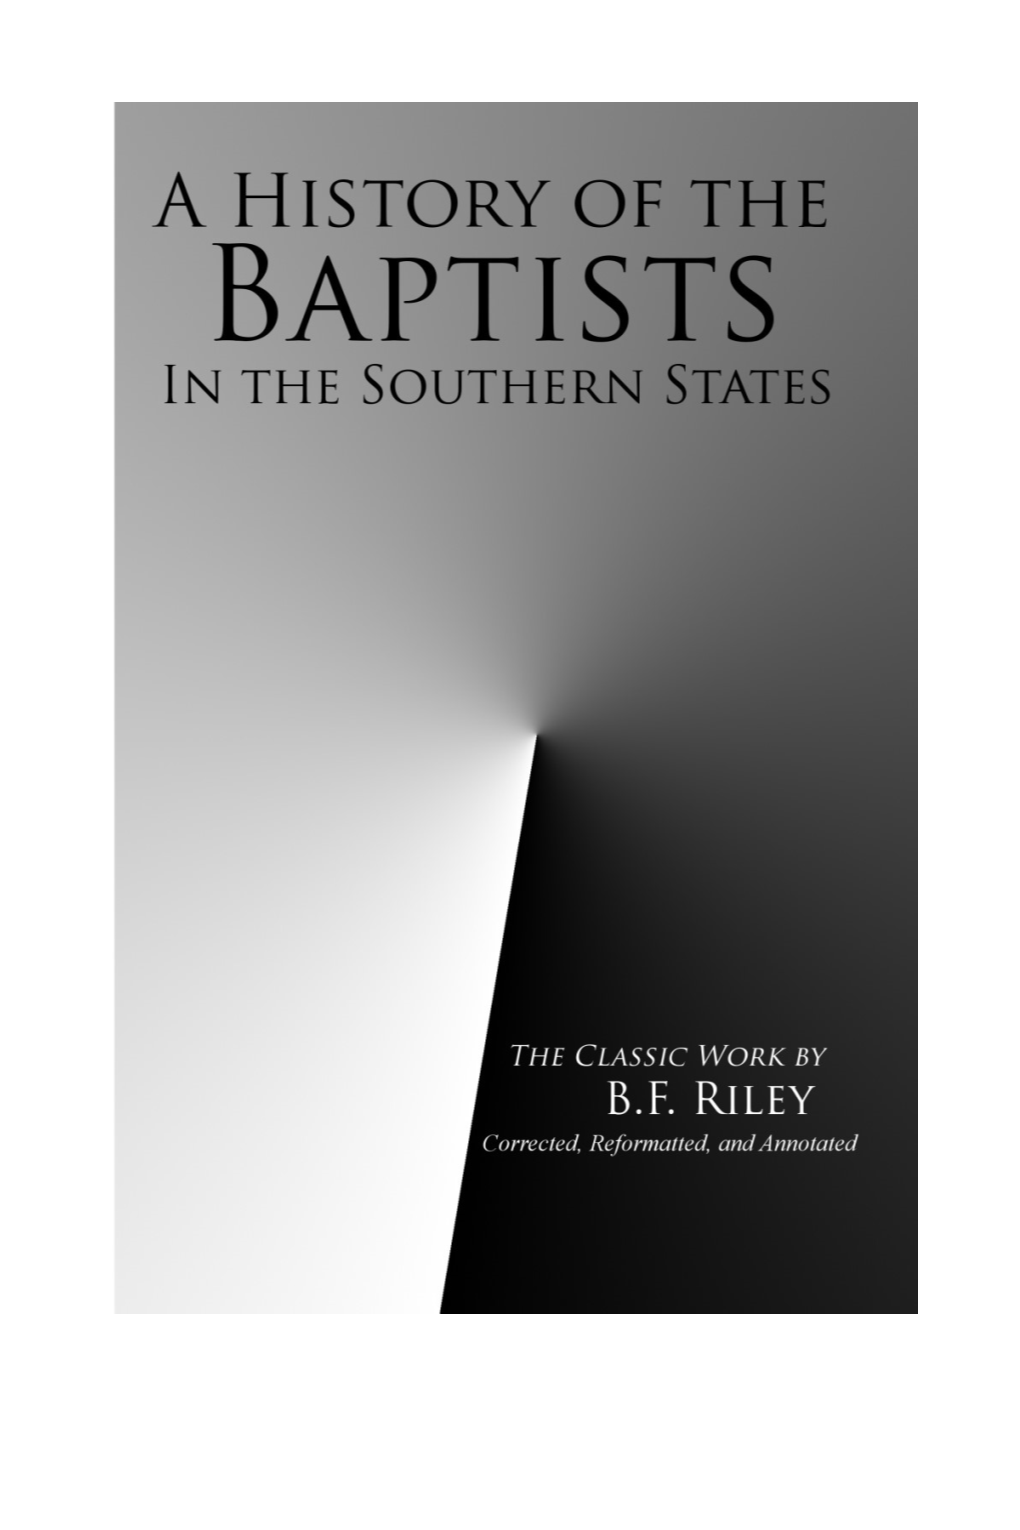 A History of the Baptists in the Southern States East of the Mississippi